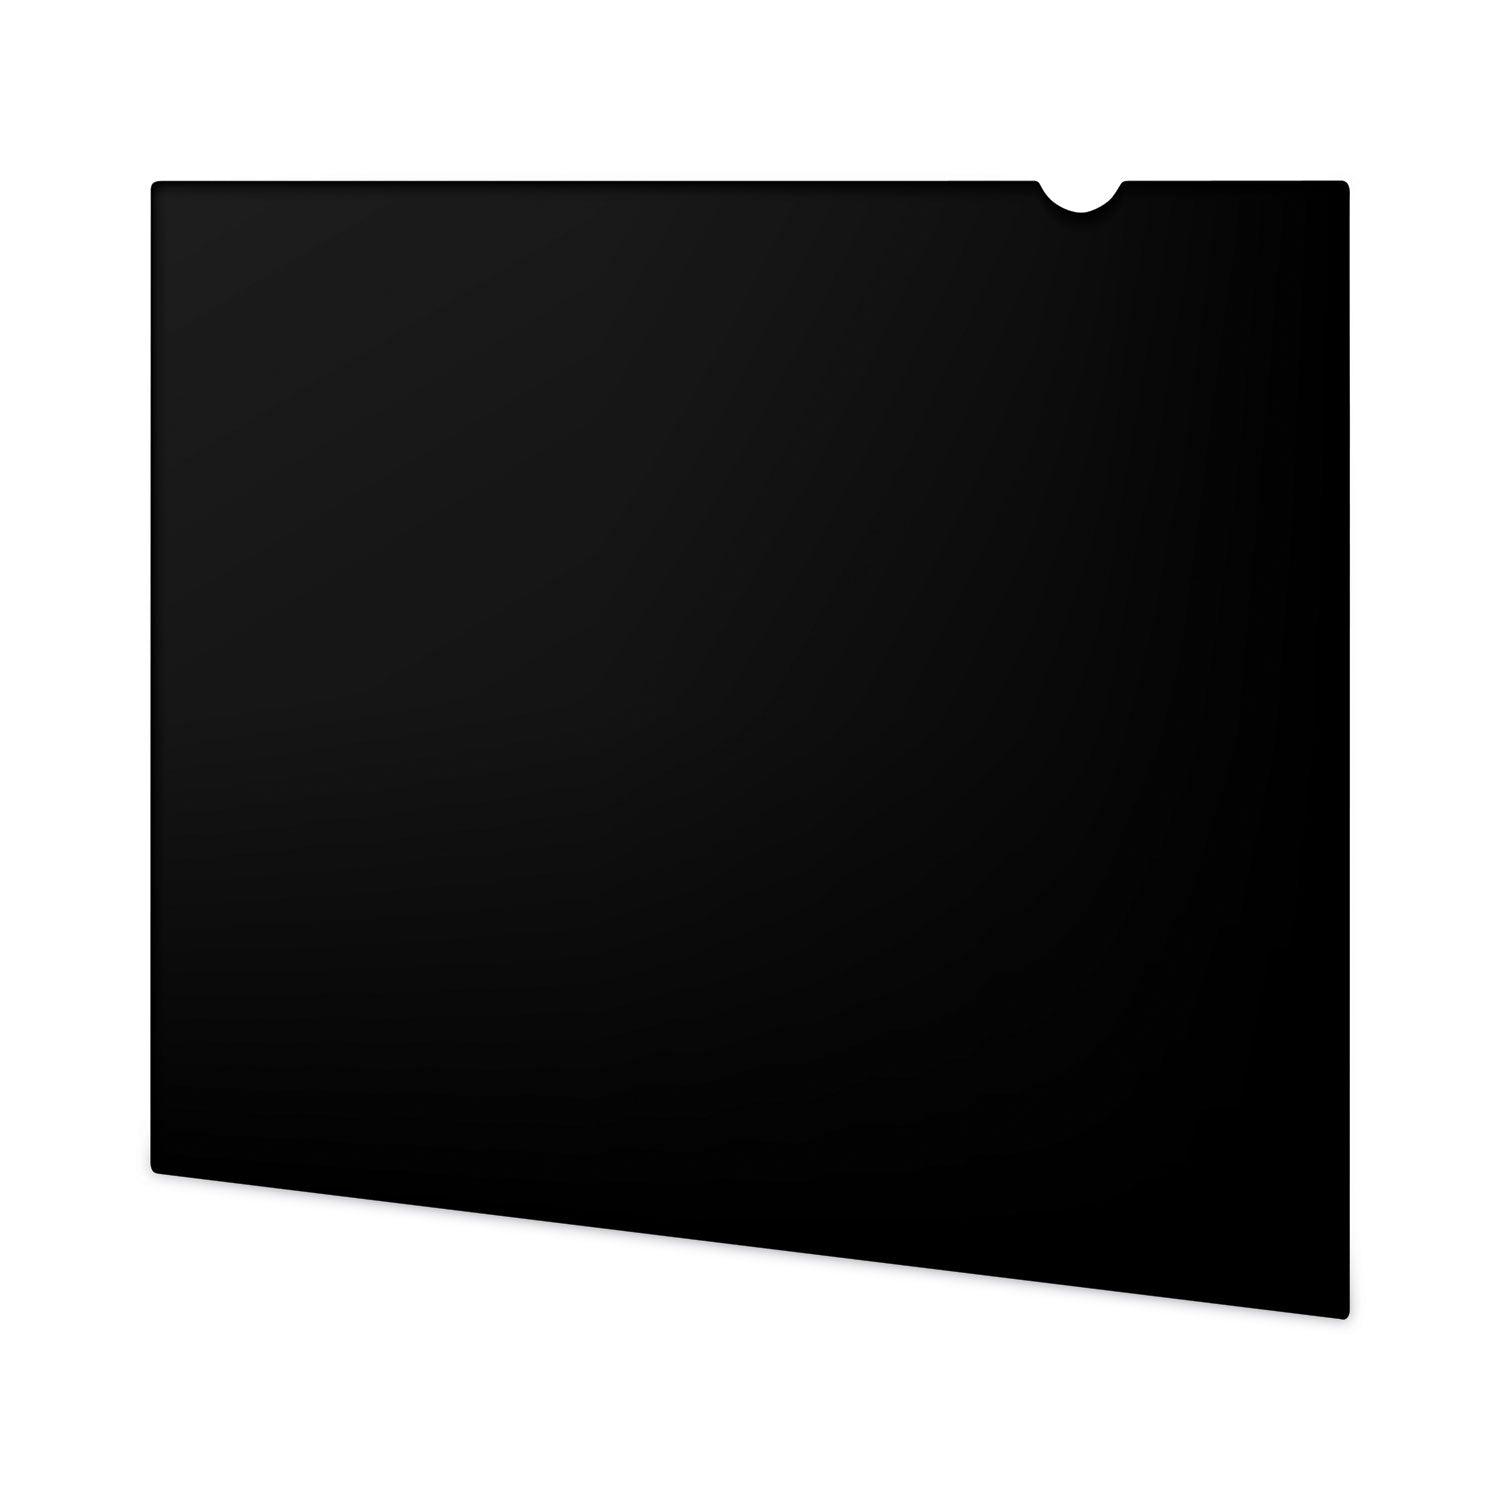 Blackout Privacy Filter for 15.6" Widescreen Laptop, 16:9 Aspect Ratio - 